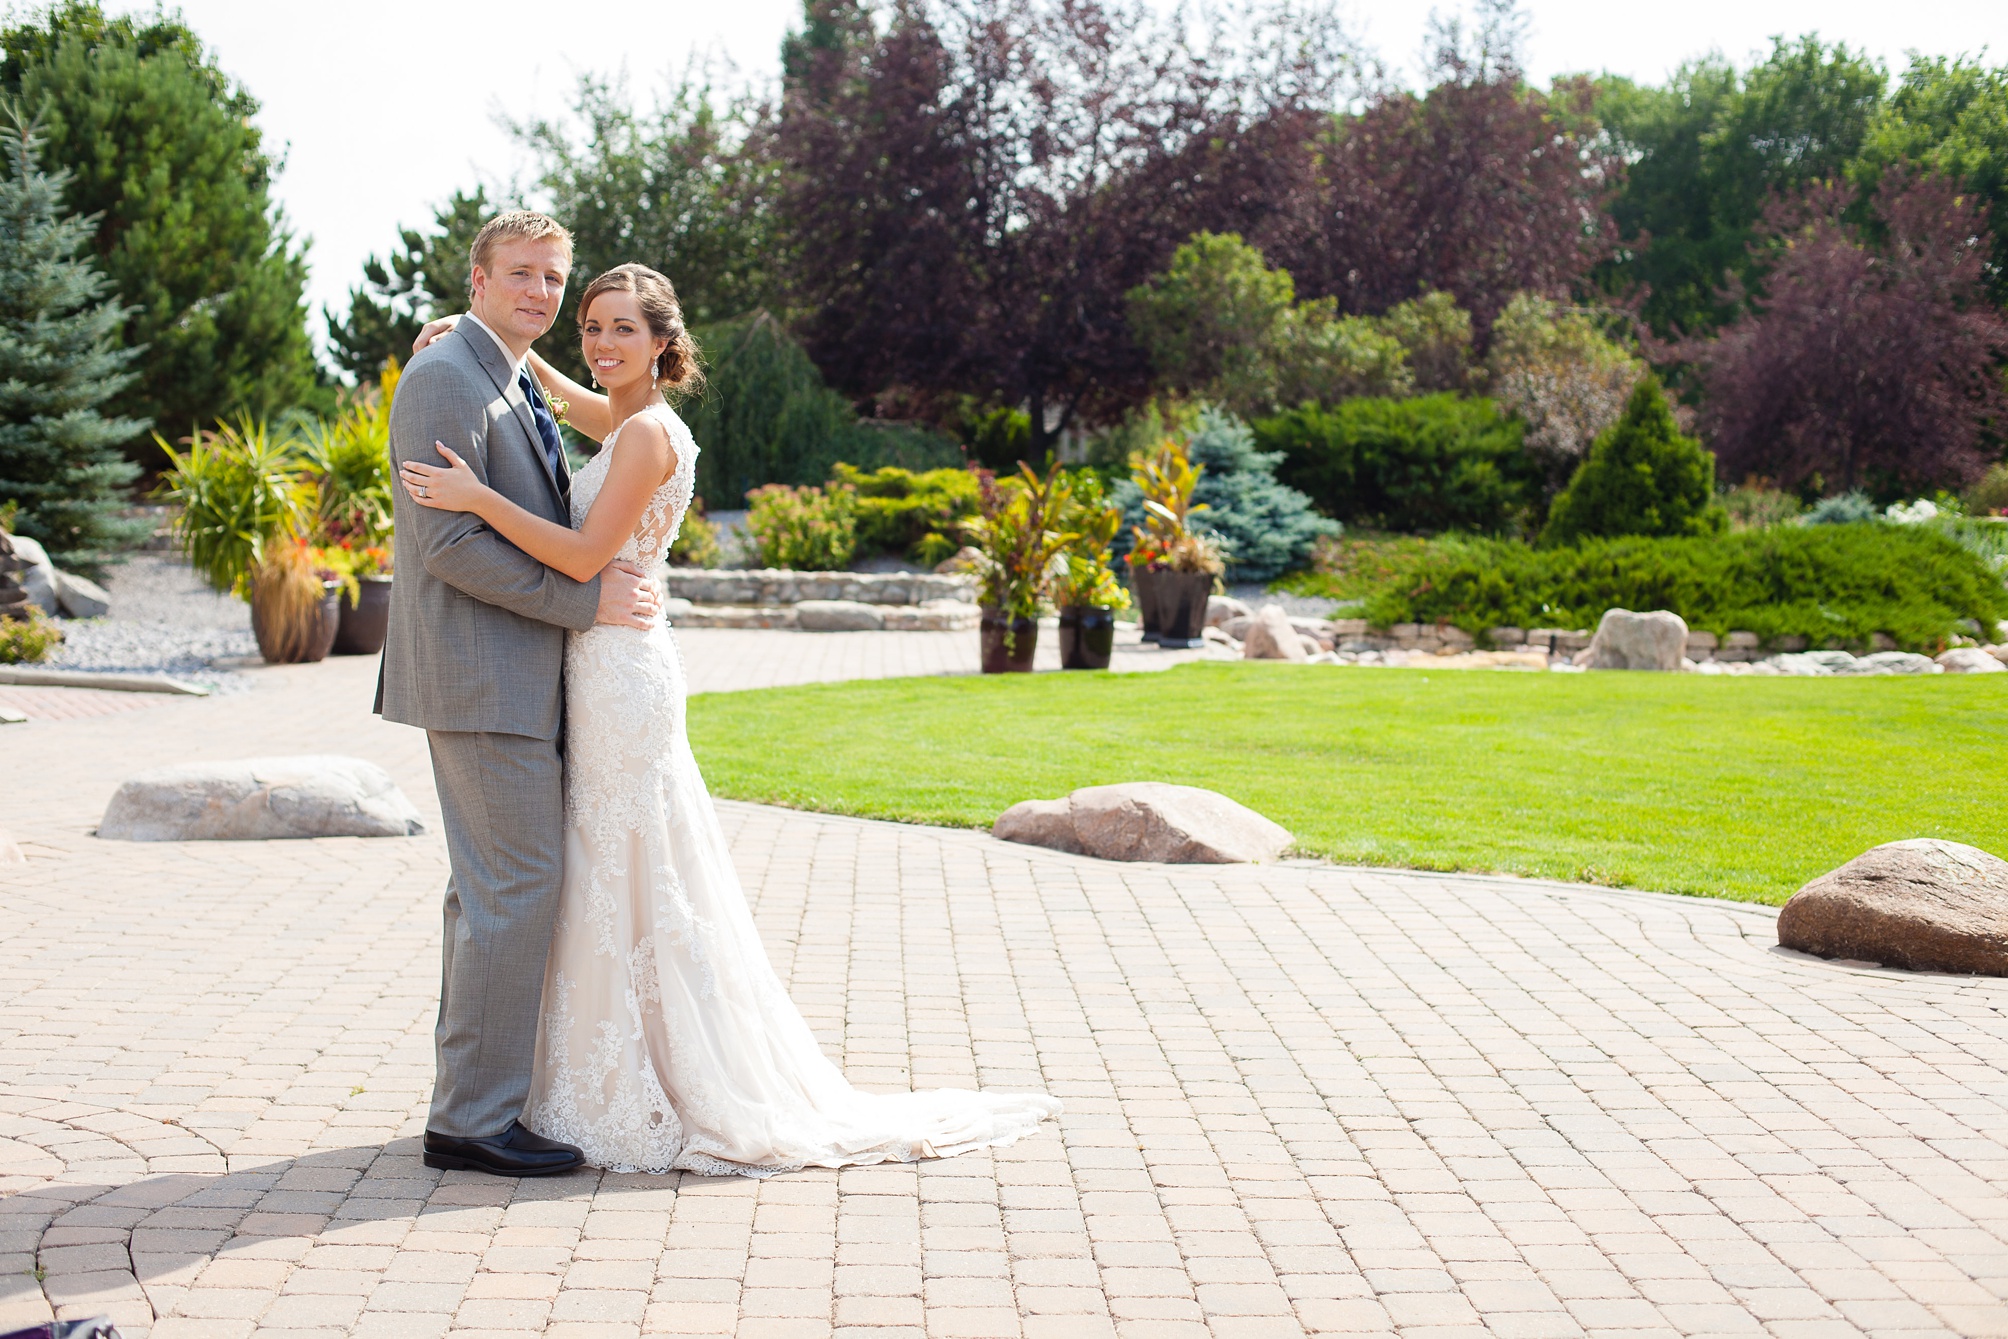 Ben and Lachelle's classy blush pink and navy blue outdoor summer wedding